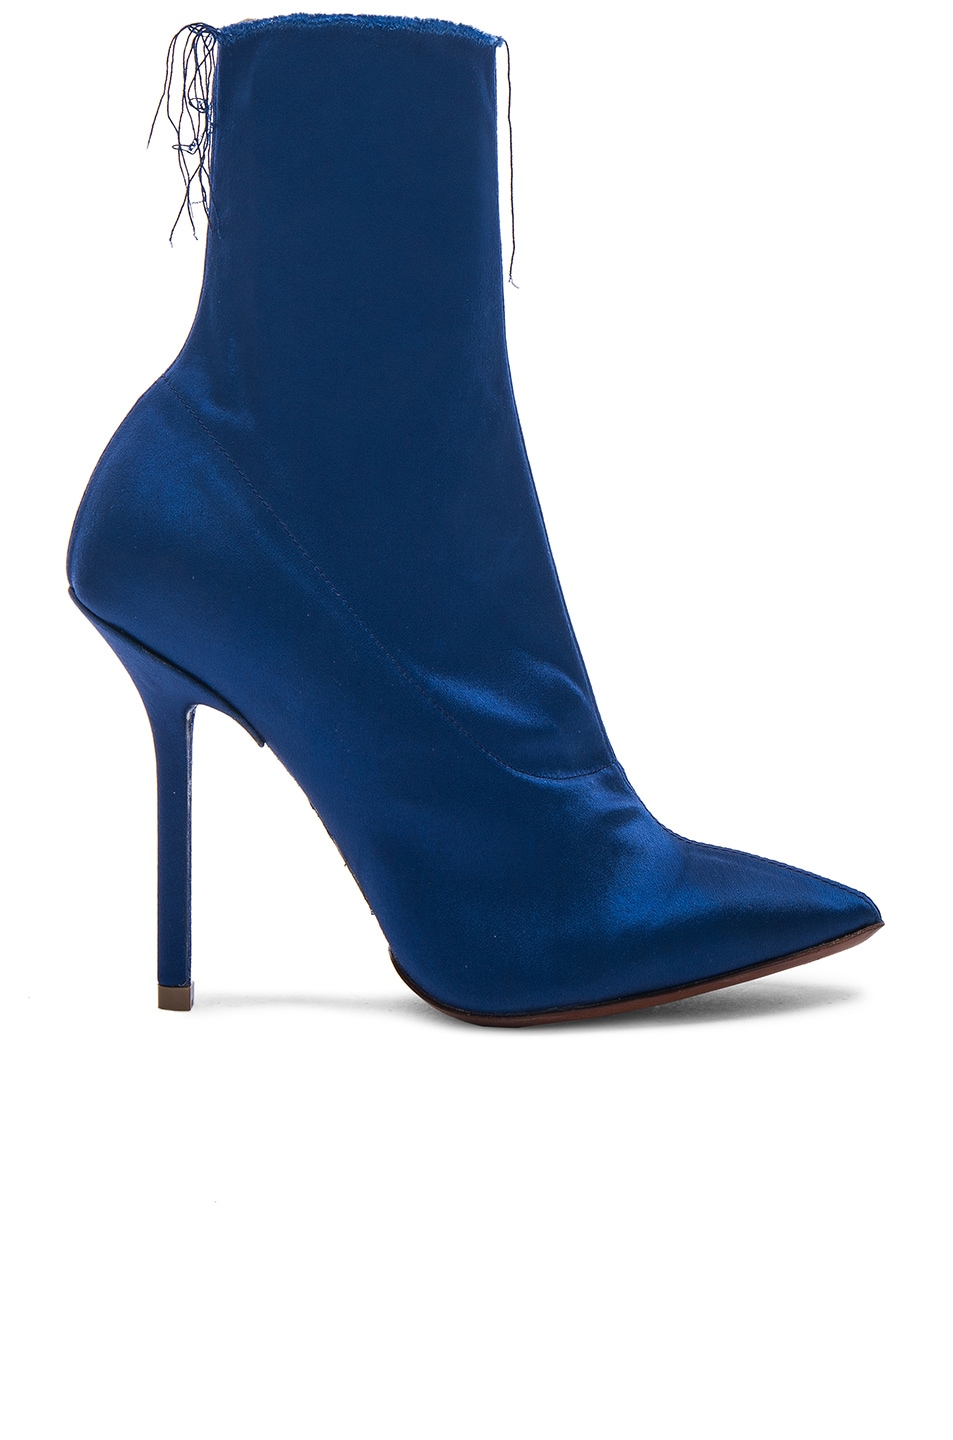 VETEMENTS Satin Ankle Boots in Blue | FWRD